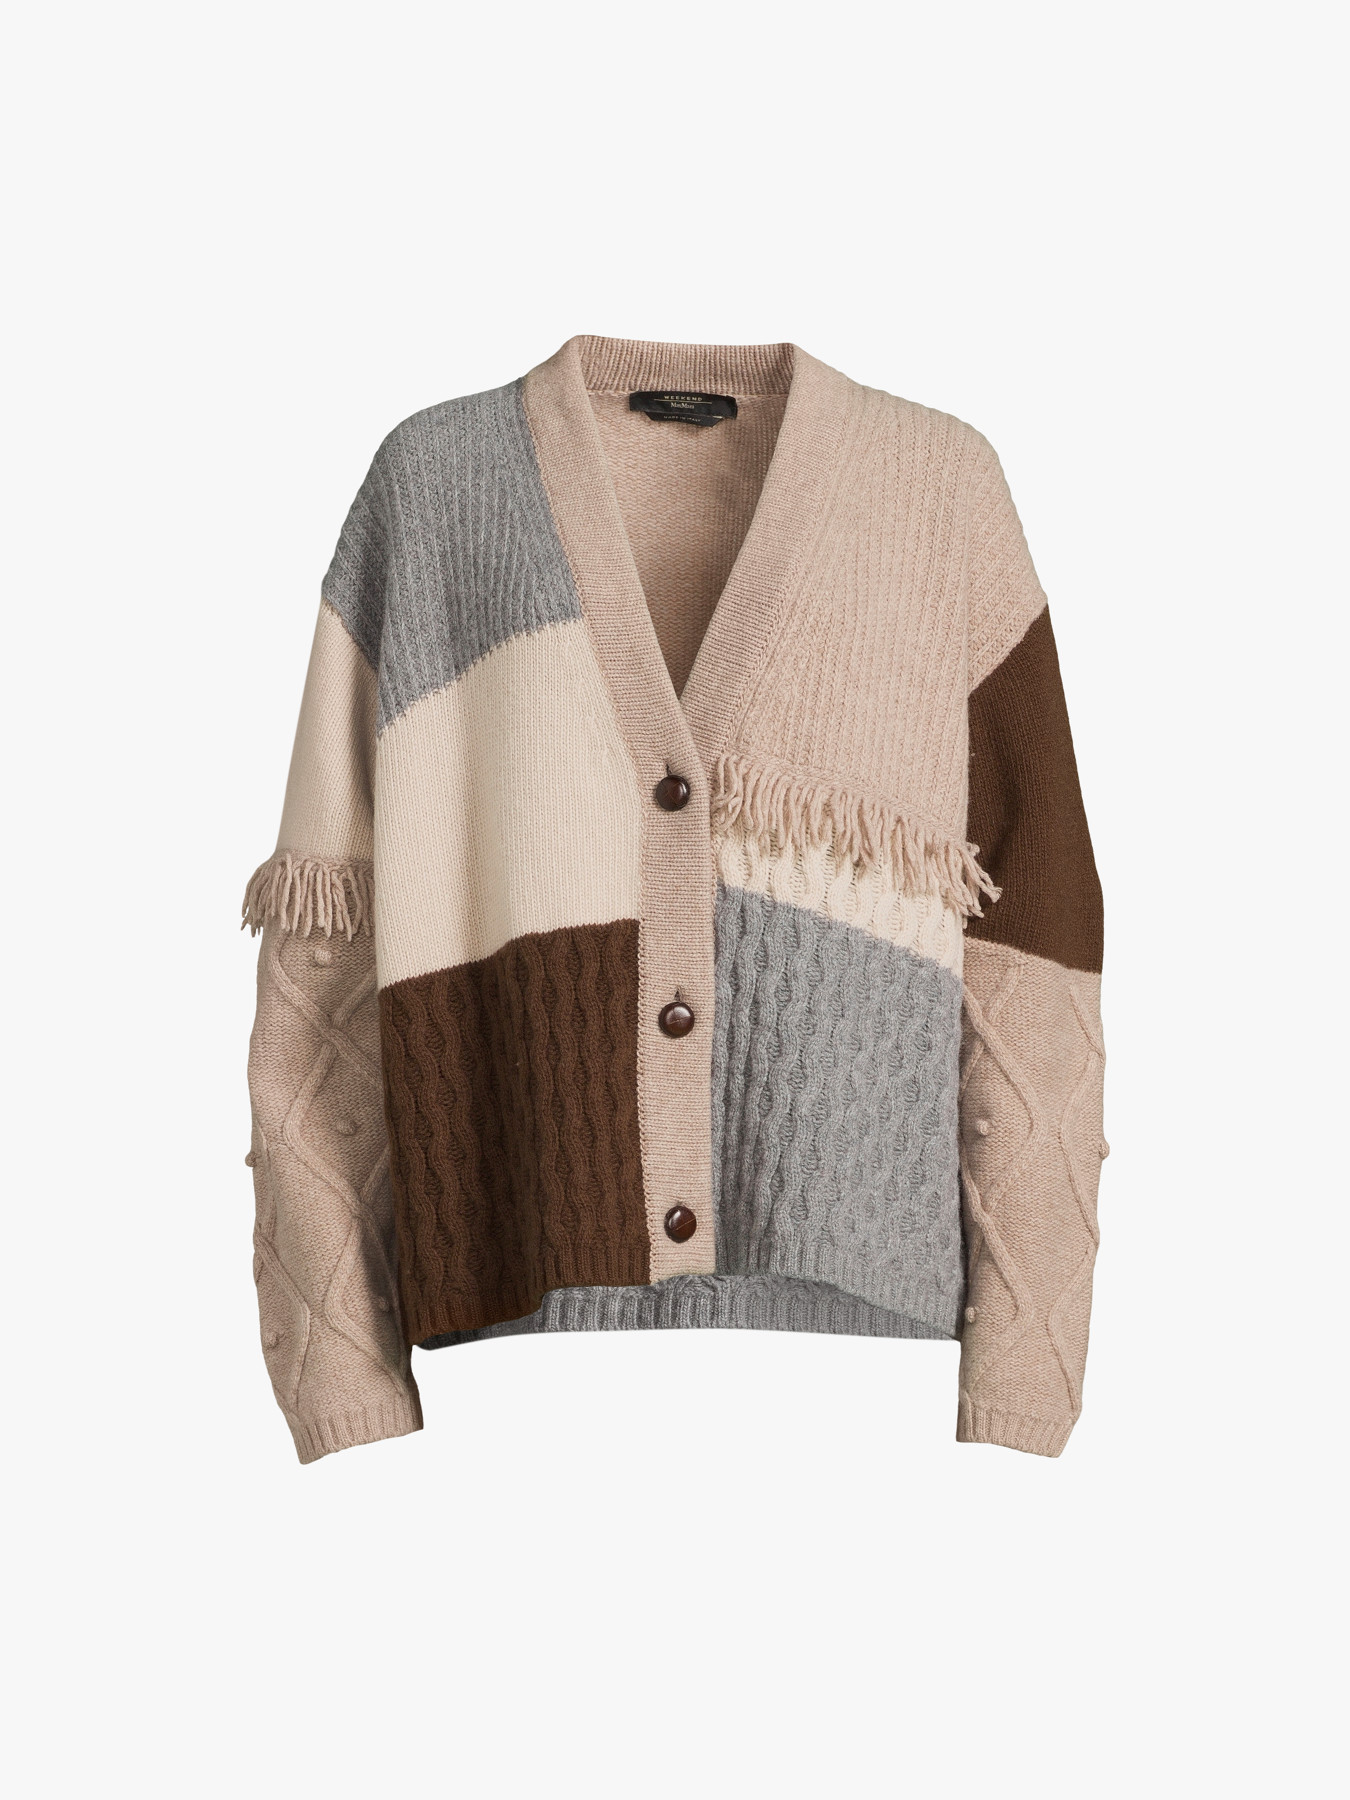 Women's Weekend Max Mara Fiocco Mix Cable Knit Cardigan | Fenwick